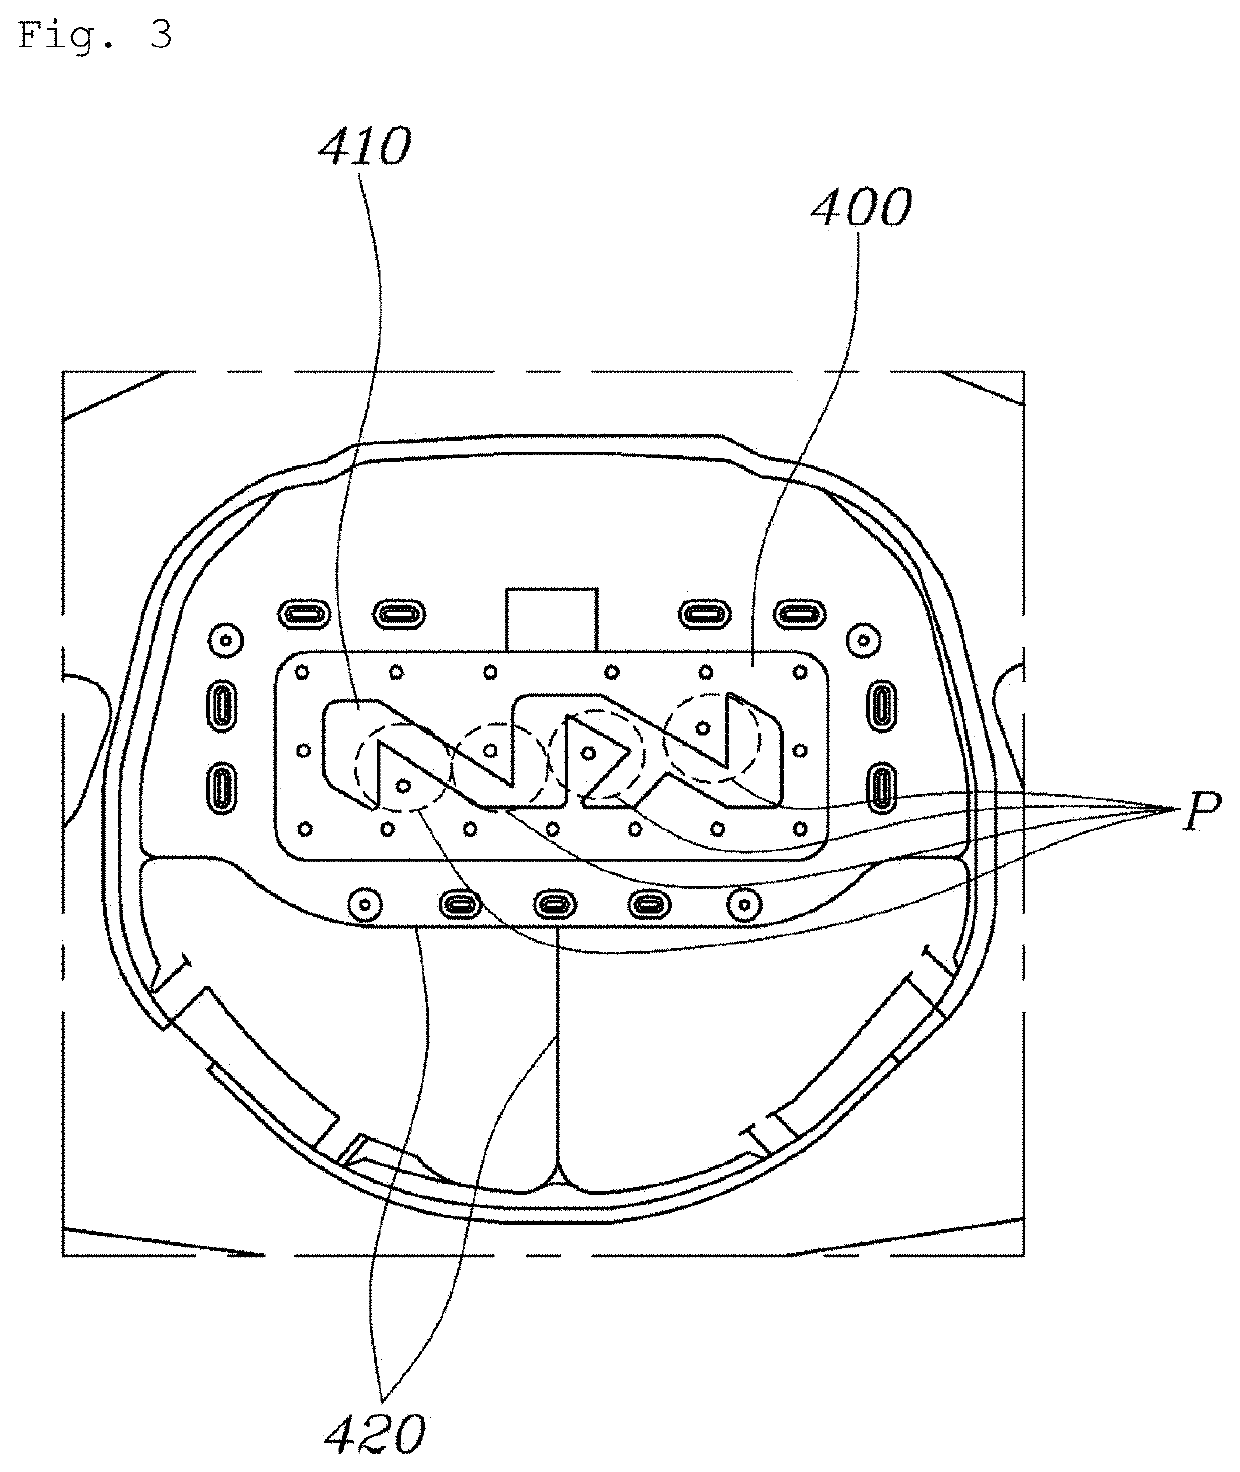 Driver airbag module with lighting device